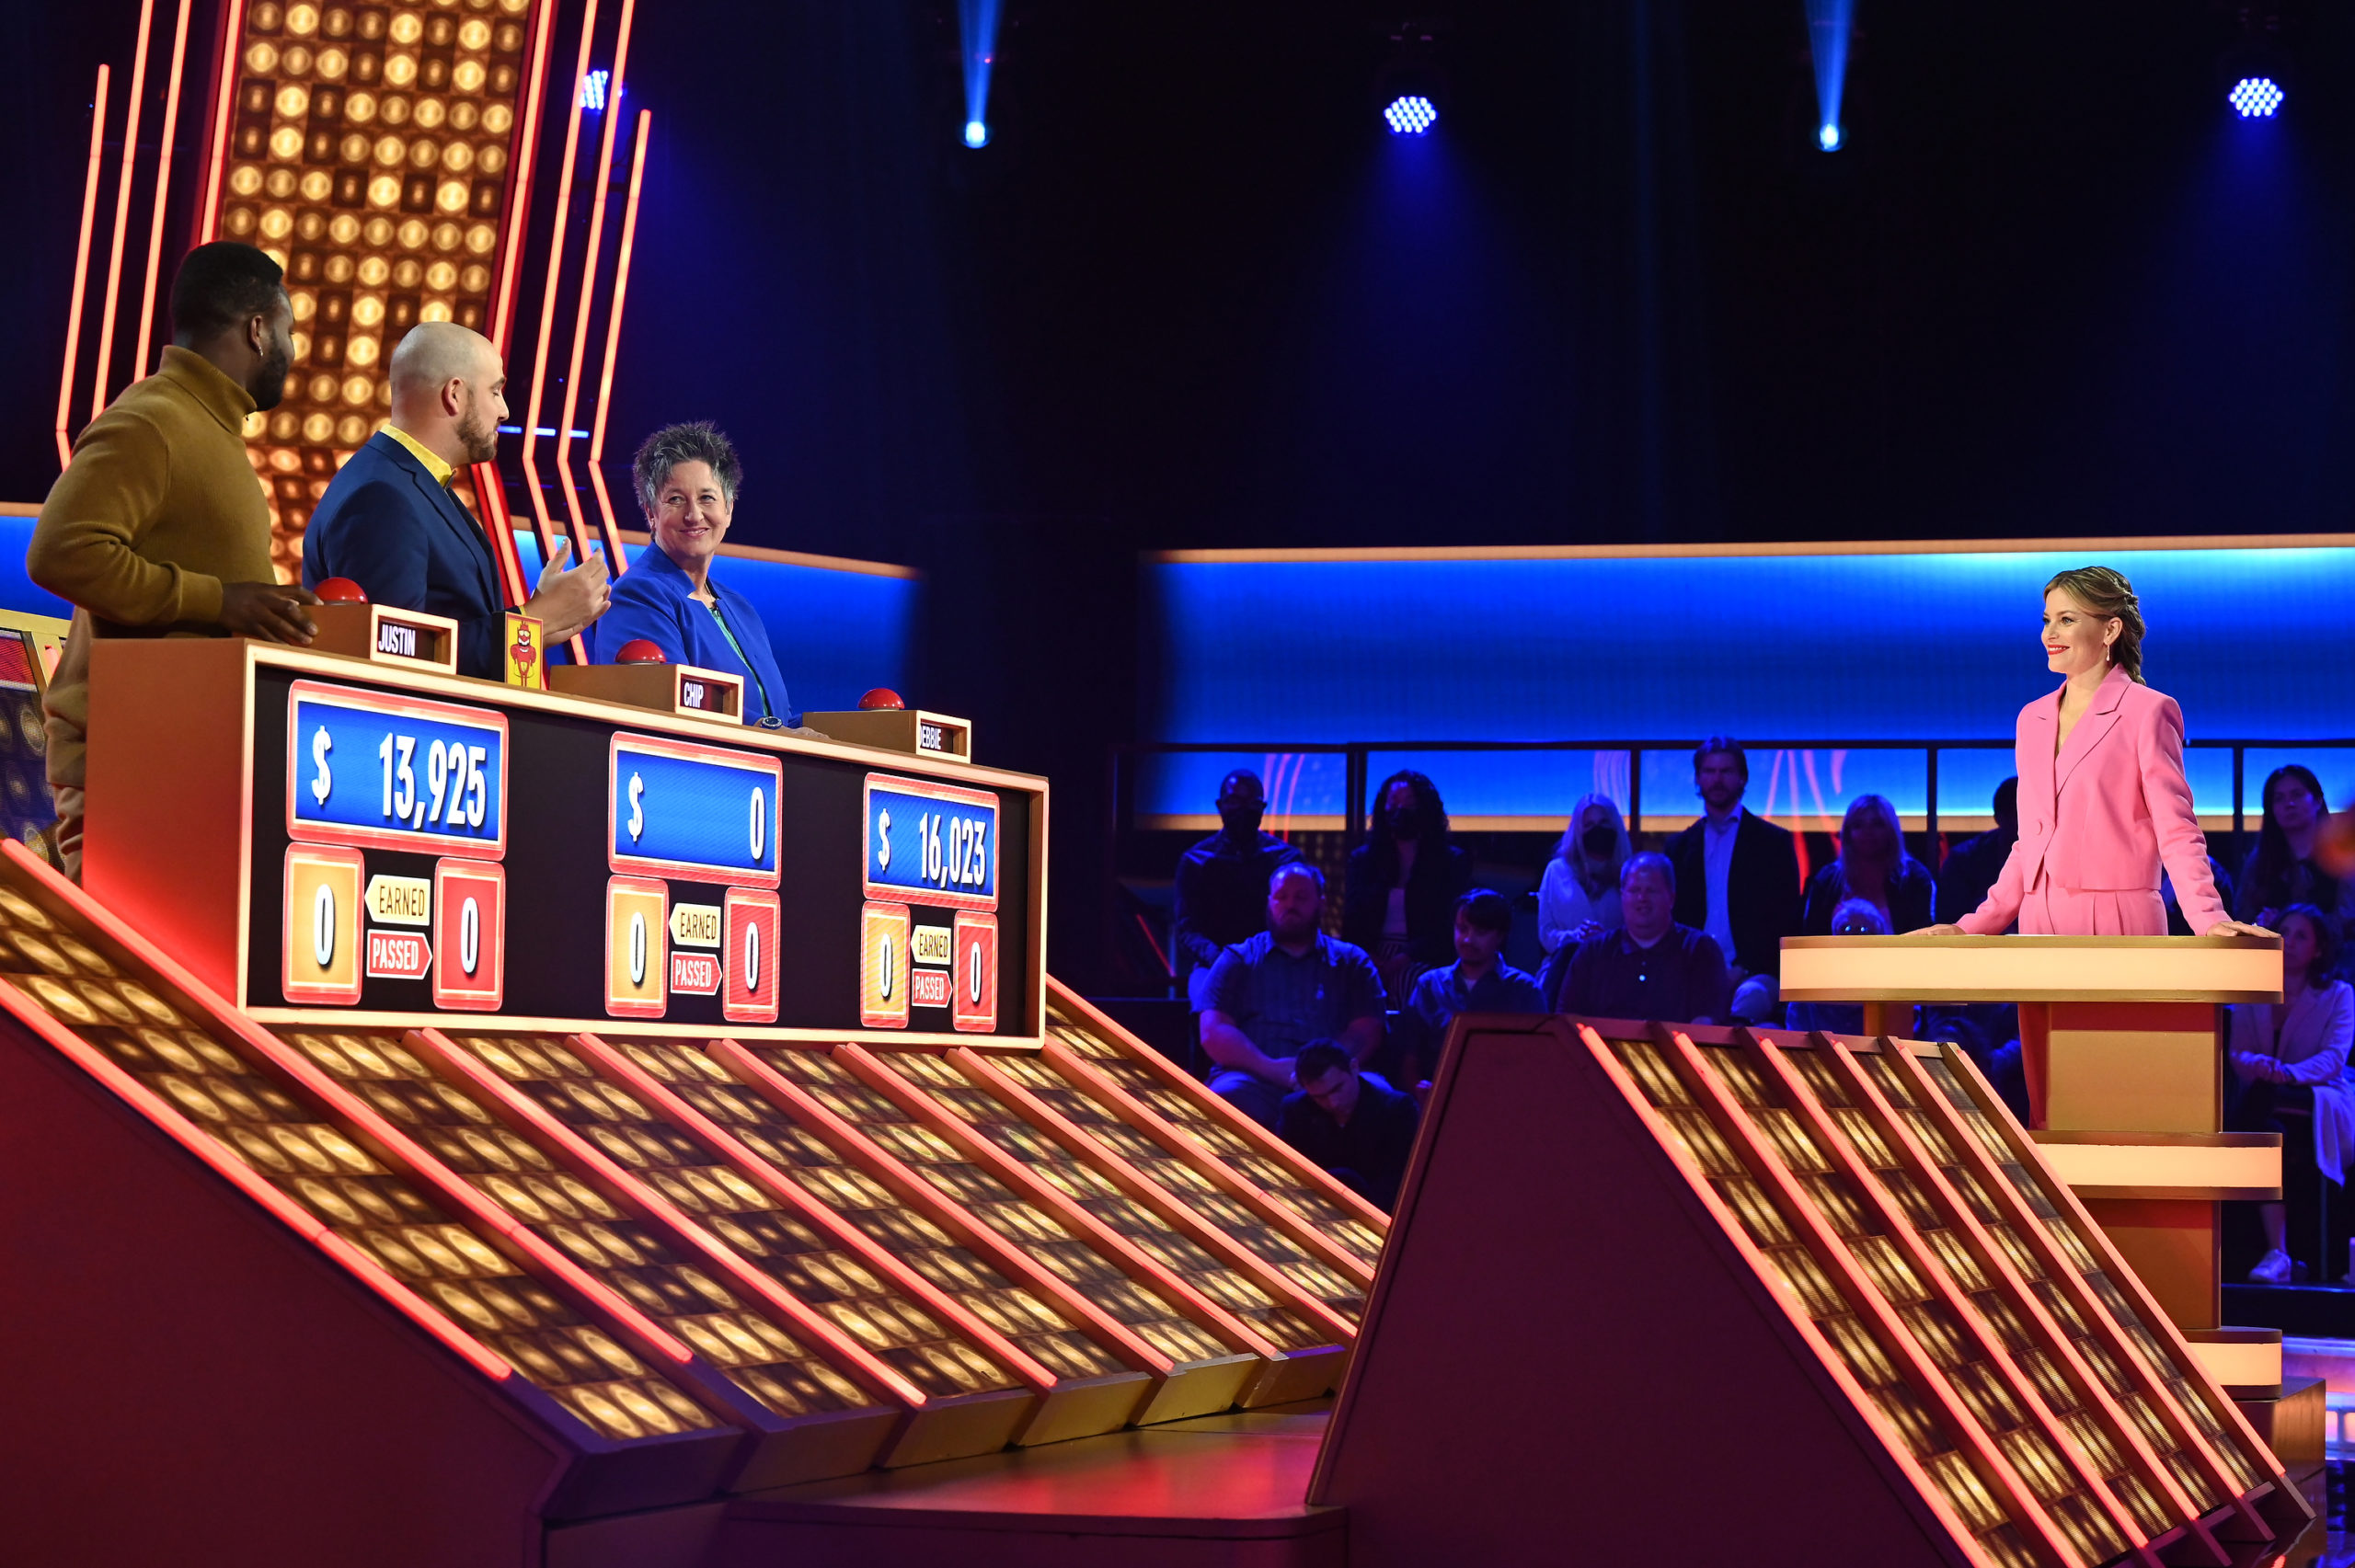 What to Expect from Press Your Luck Season 5